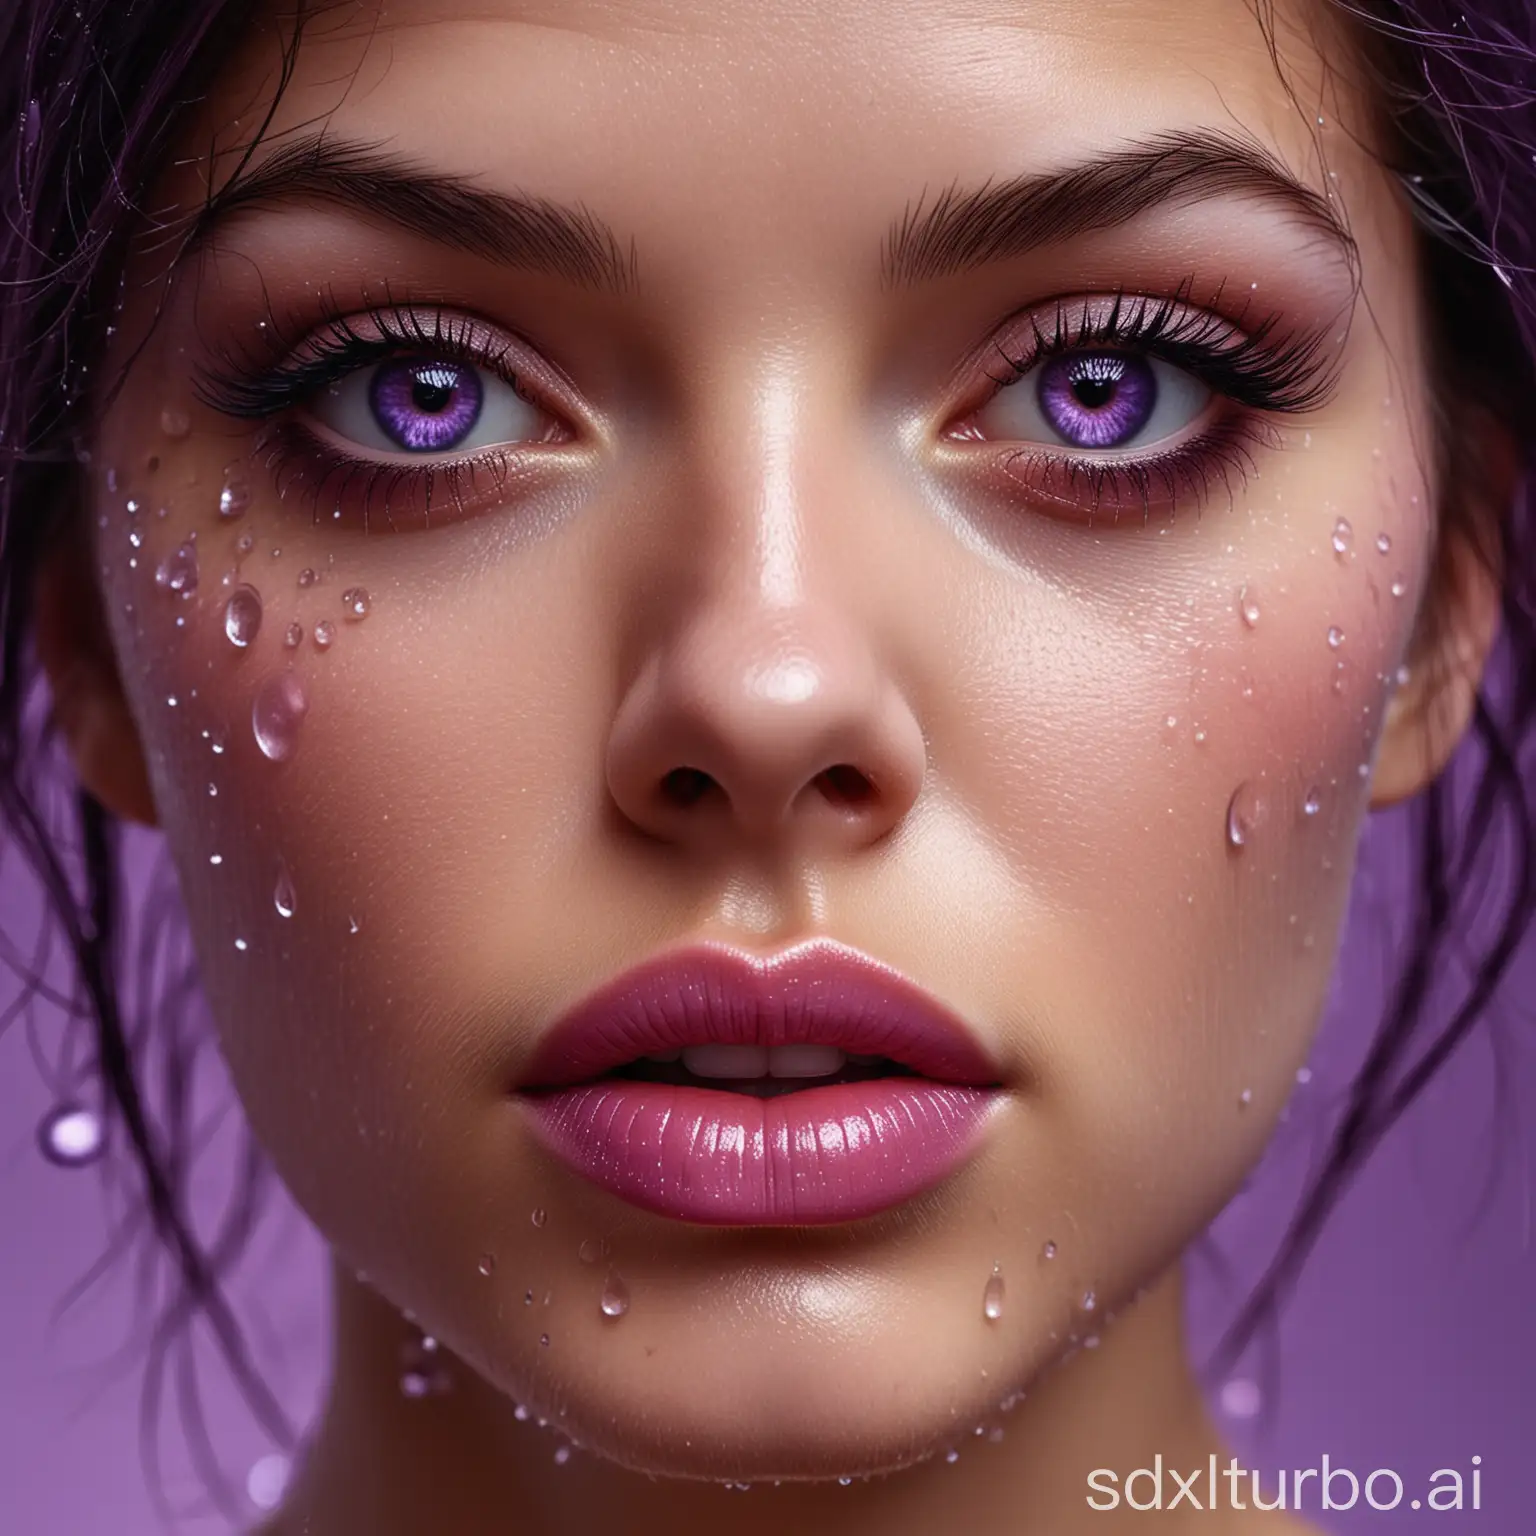 Intensely-Detailed-CloseUp-Portrait-of-Amber-Heart-with-Ethereal-Purple-Monochrome-Palette